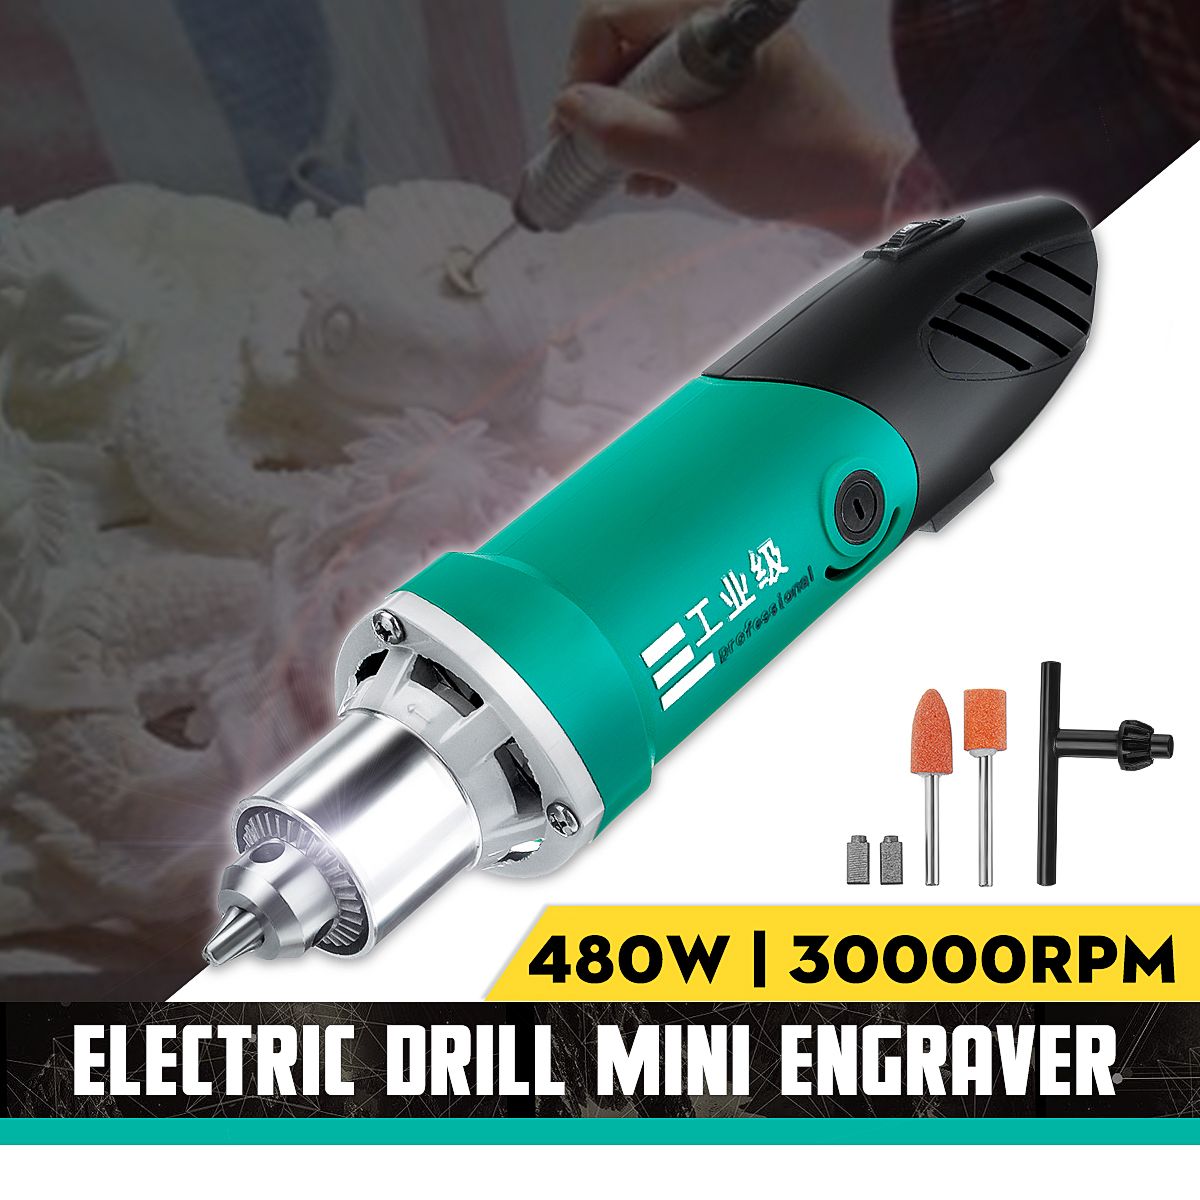 30000RPM-480W-Electric-Grinder-Drill-Engraver-Tool-Variable-Speed-Rotary-Carving-Polishing-Machine-1-1457301